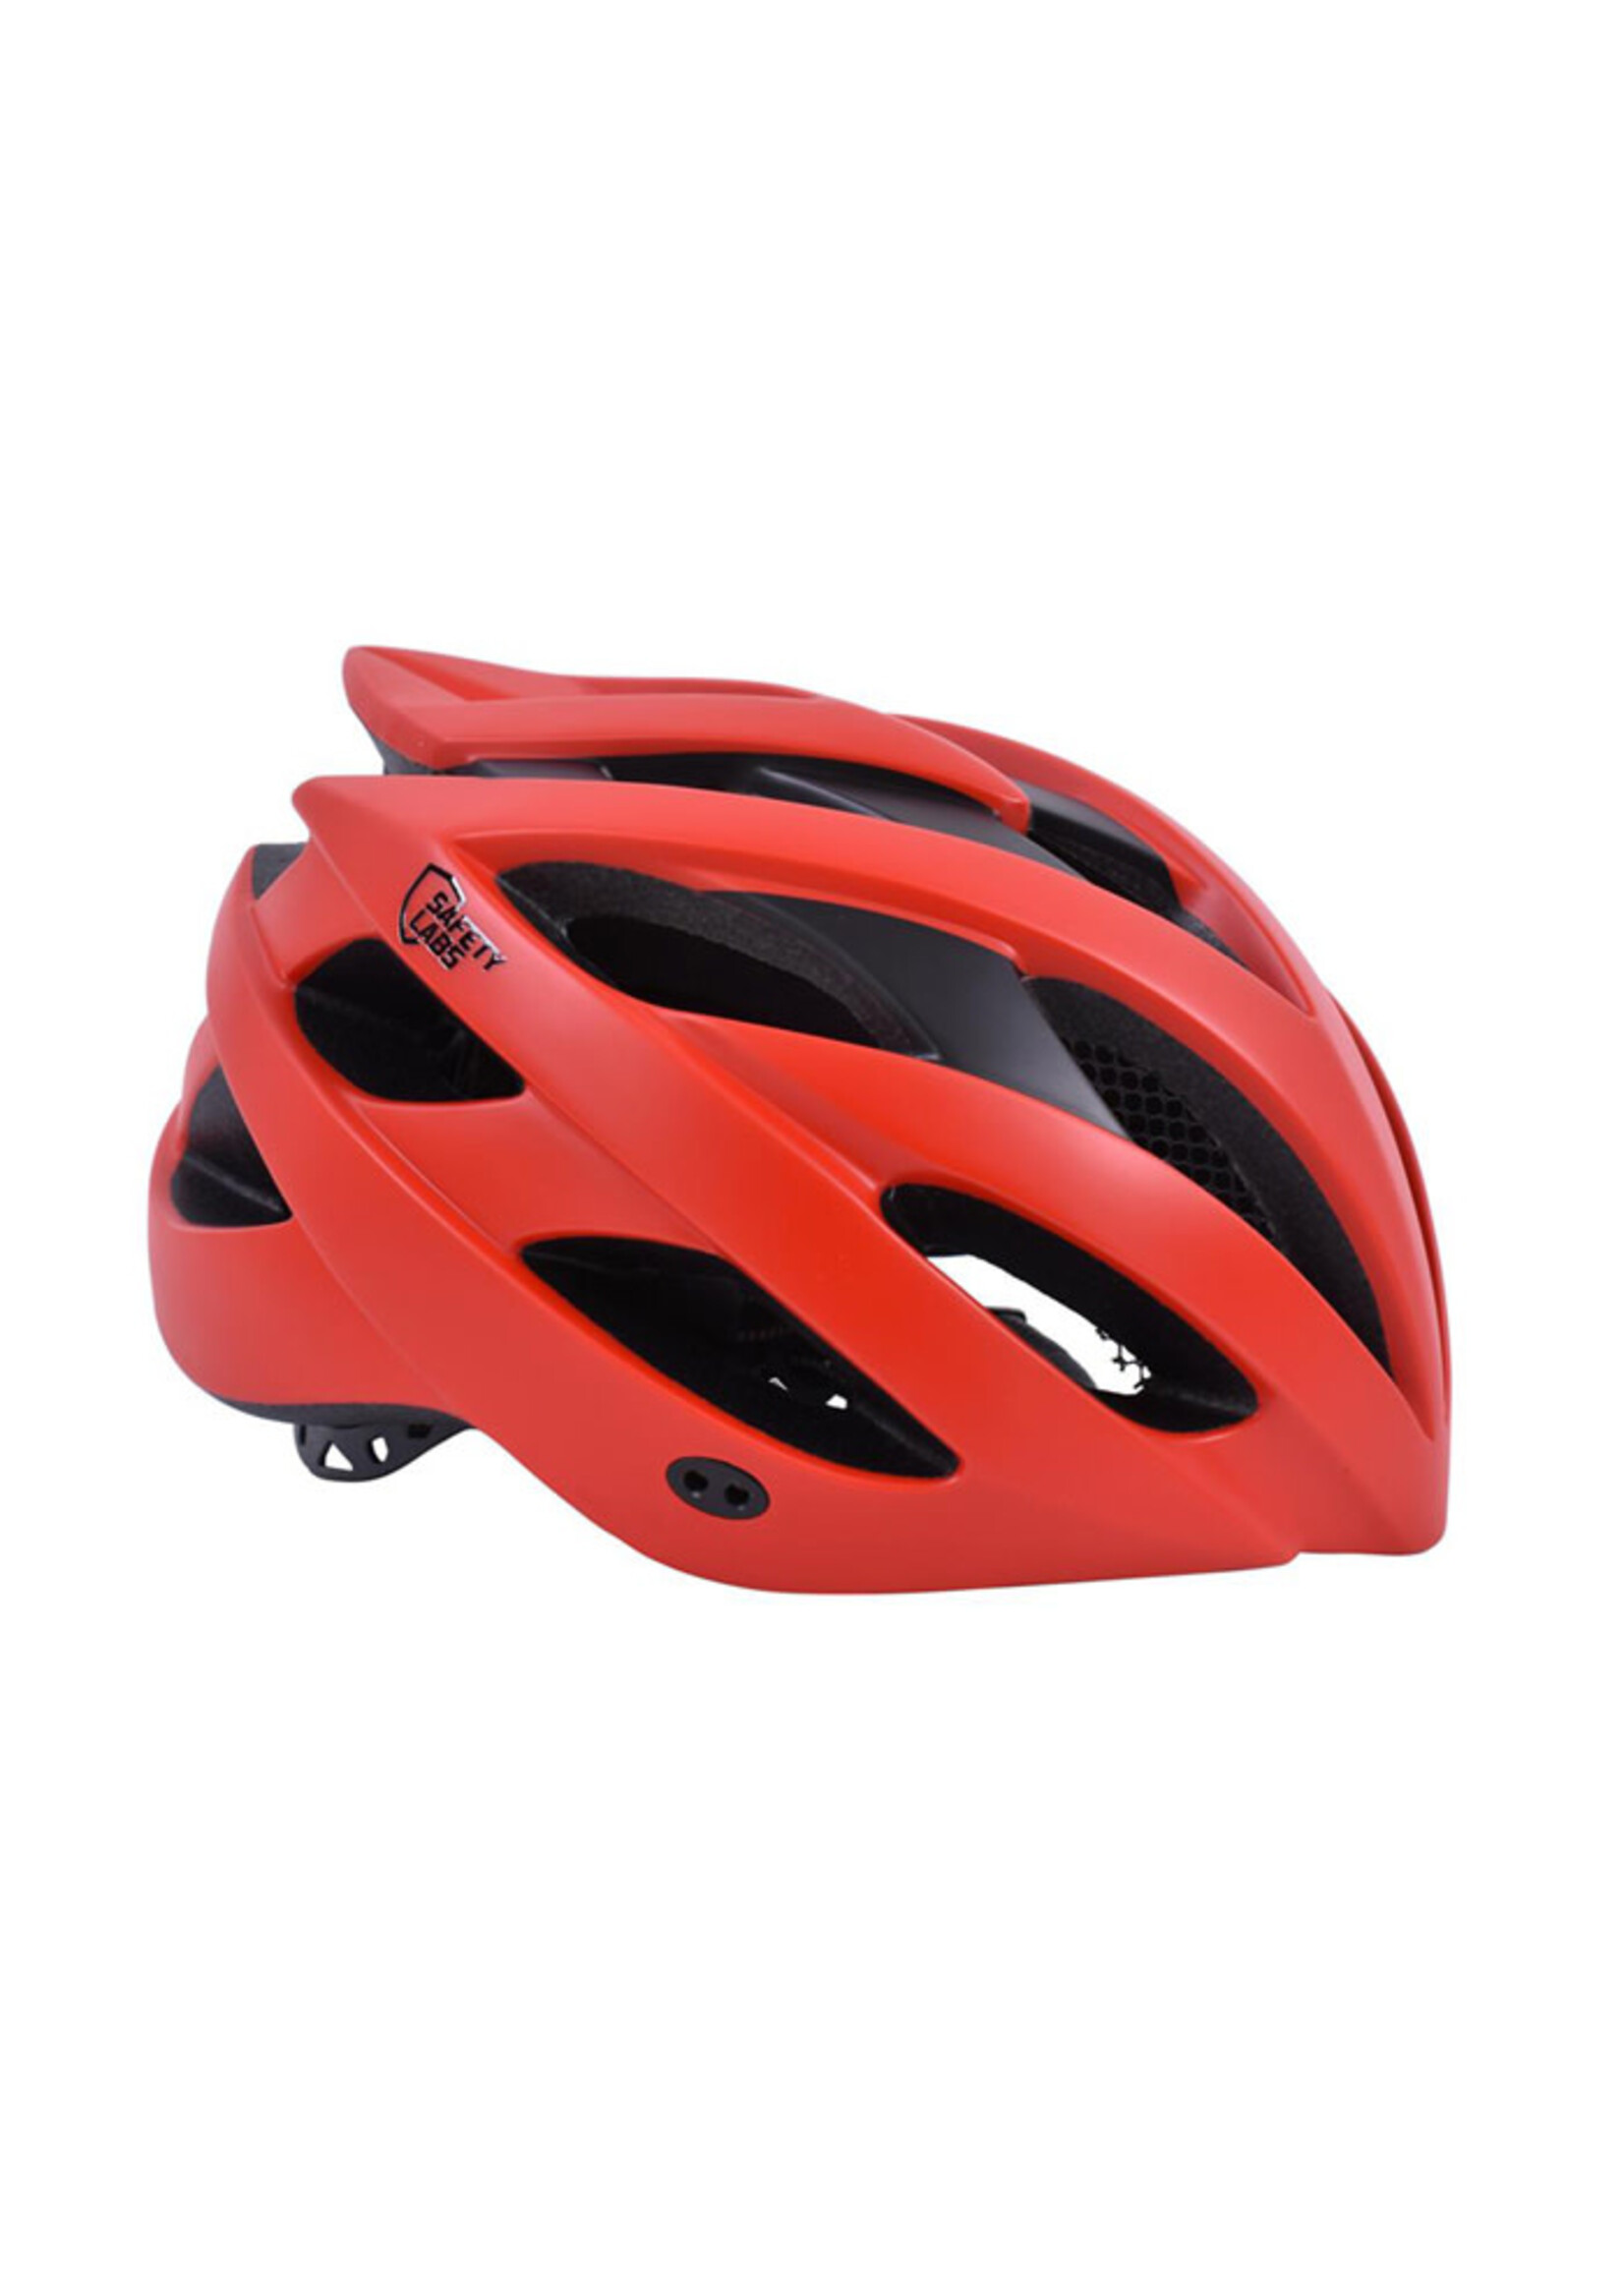 SAFETY LABS Casco AVEX multi-propósito color rojo Safety Labs